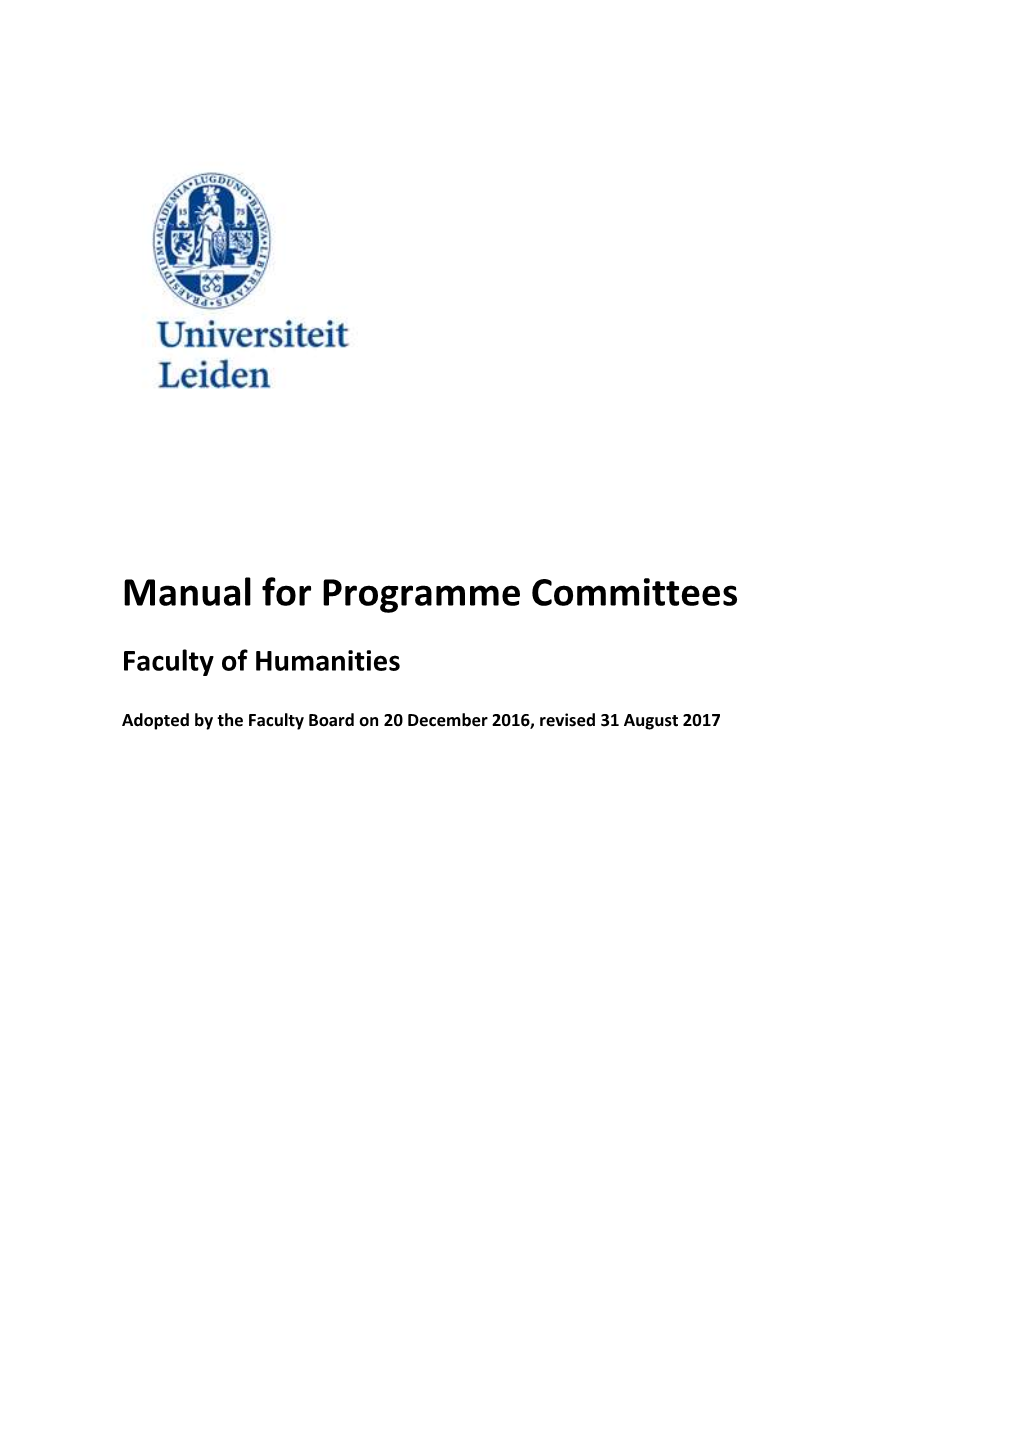 Manual for Programme Committees